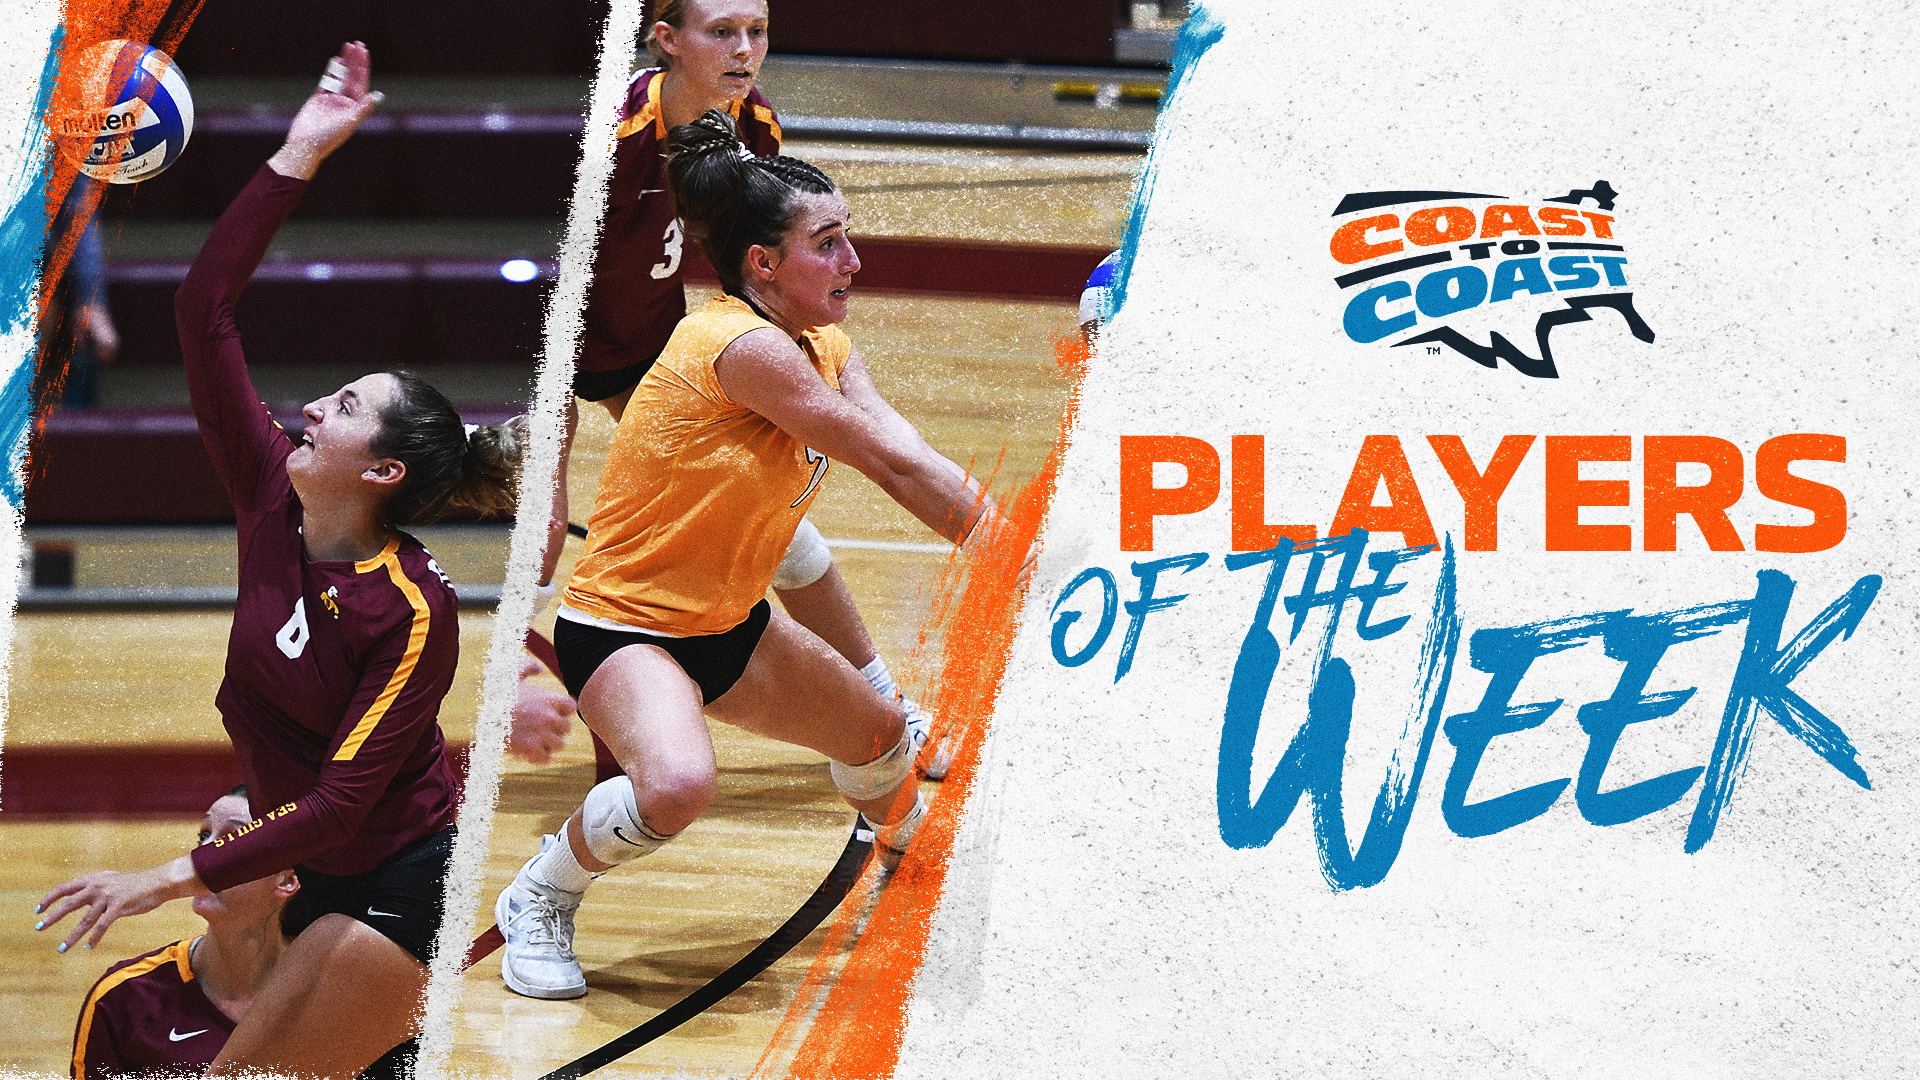 Salisbury’s Eustace, Rail Named C2C Women's Volleyball Players of the Week